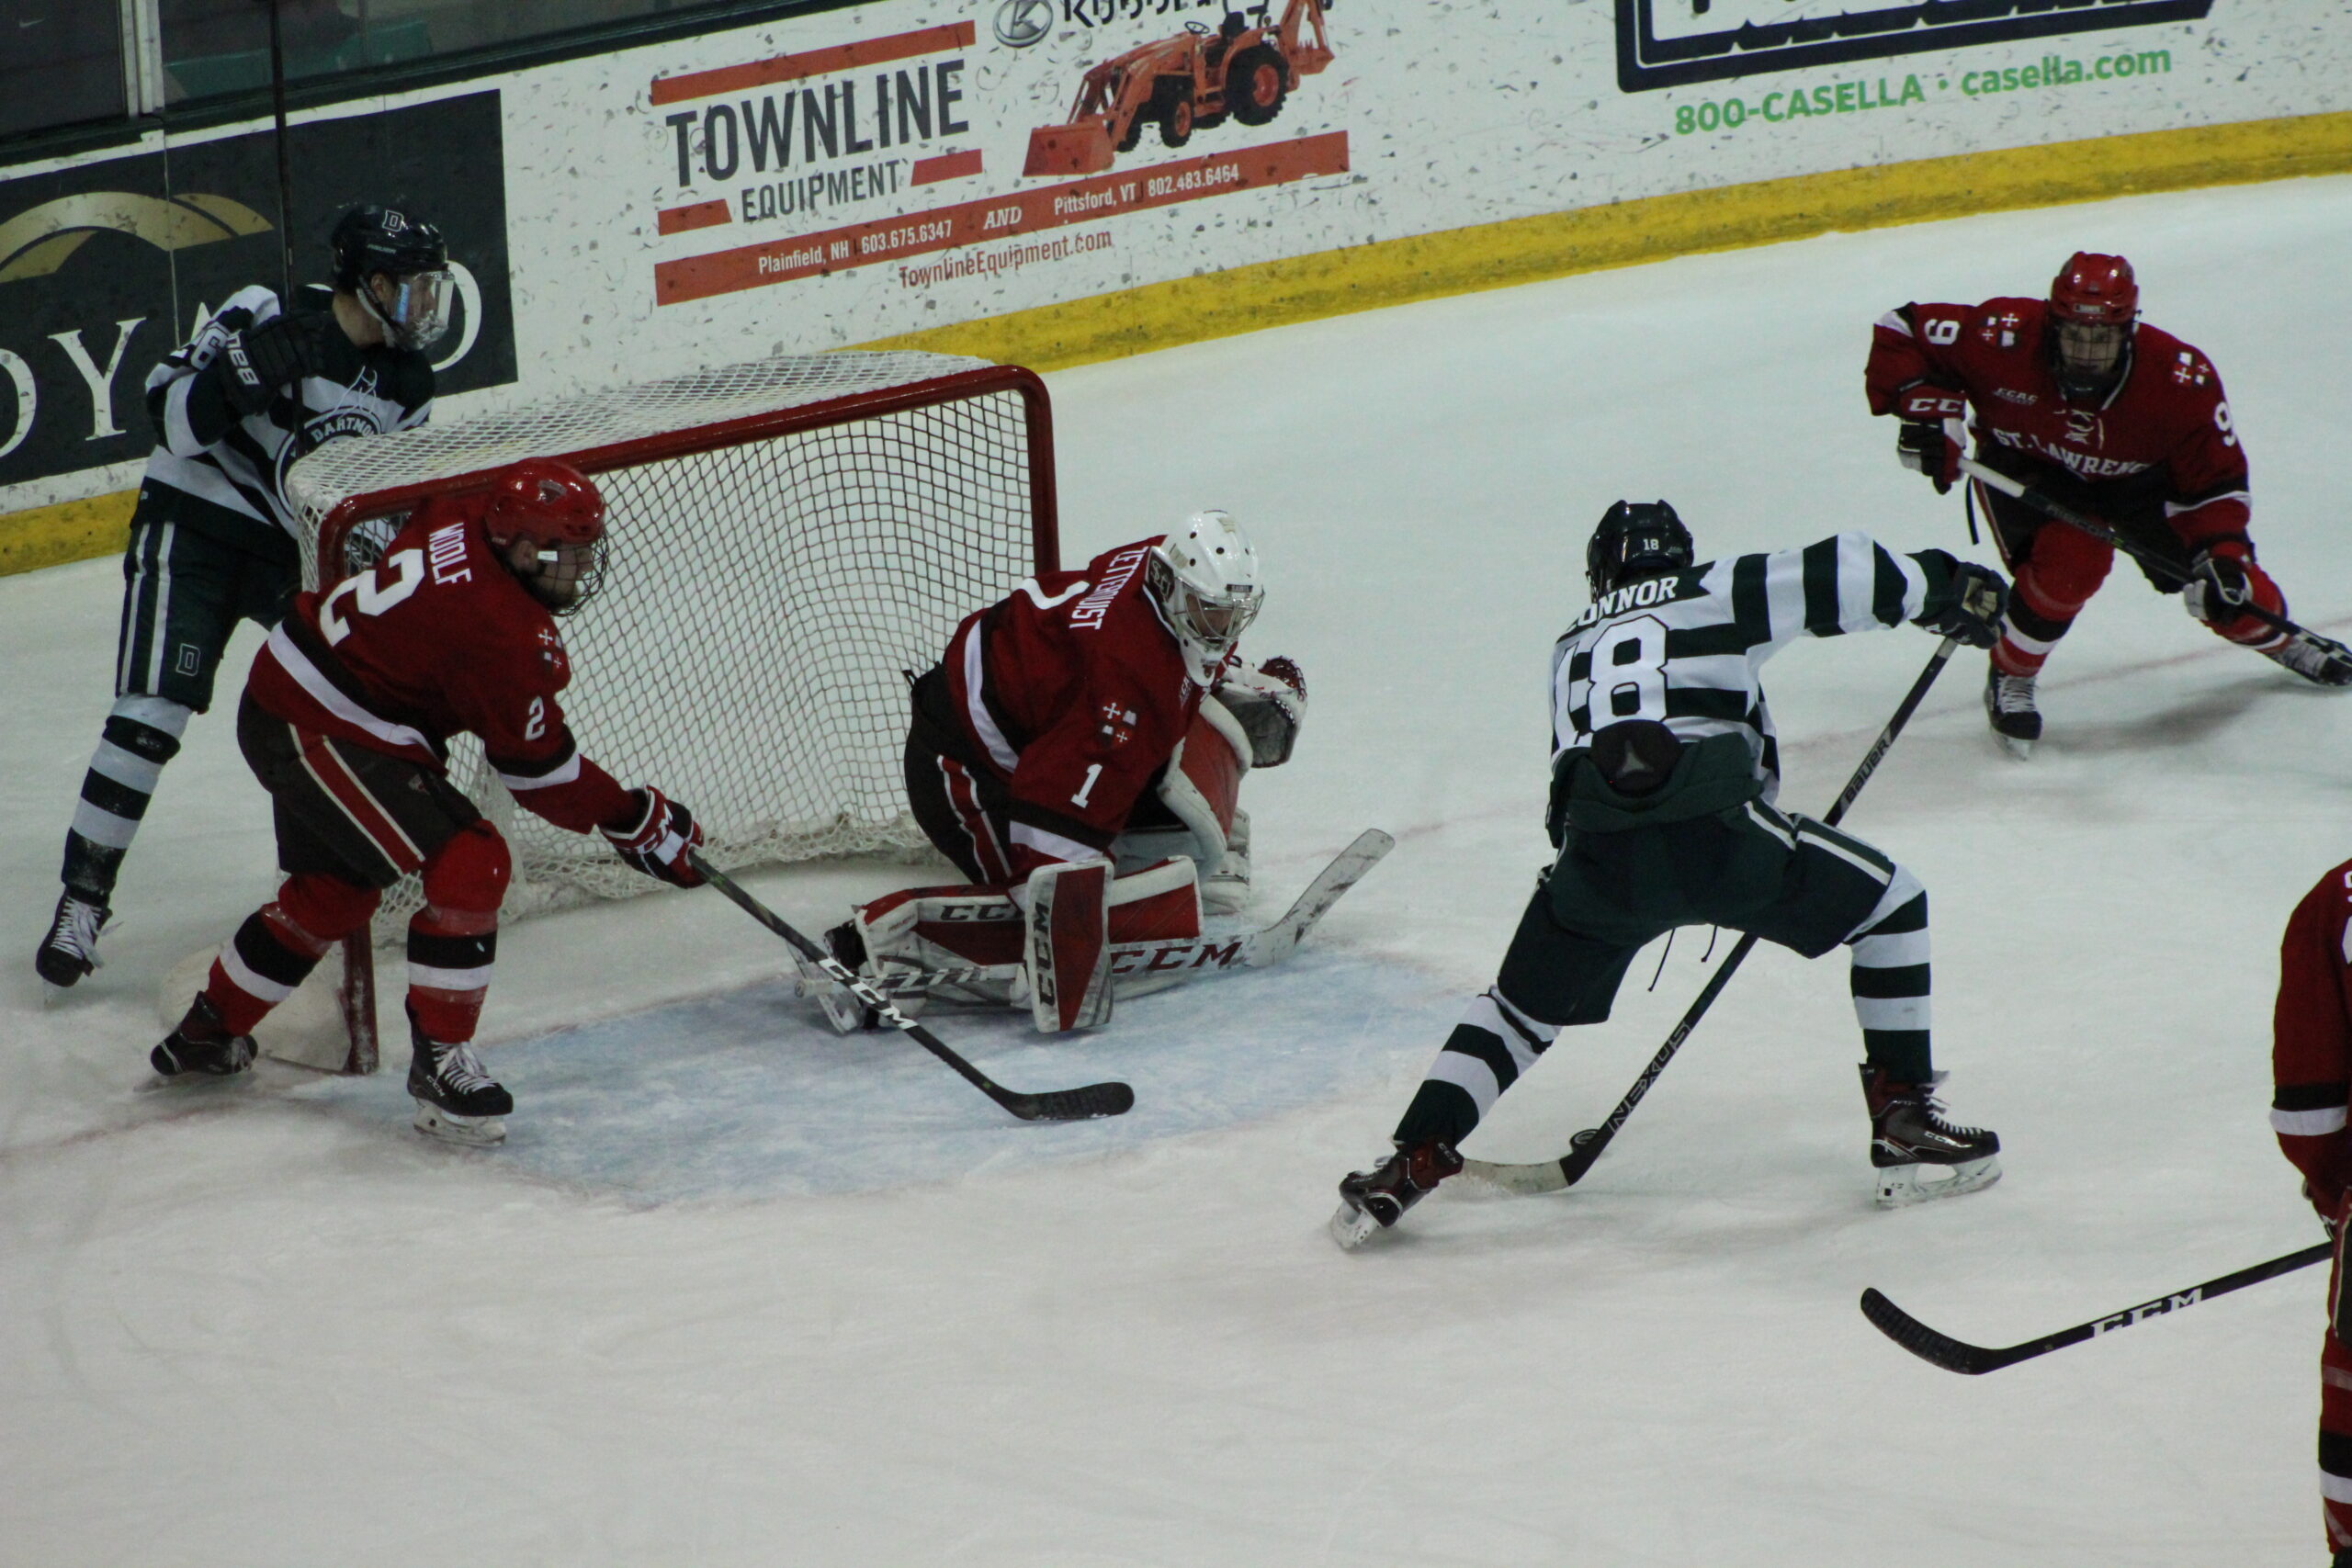 Dartmouth Blanks St. Lawrence To Advance To ECAC Quarterfinals